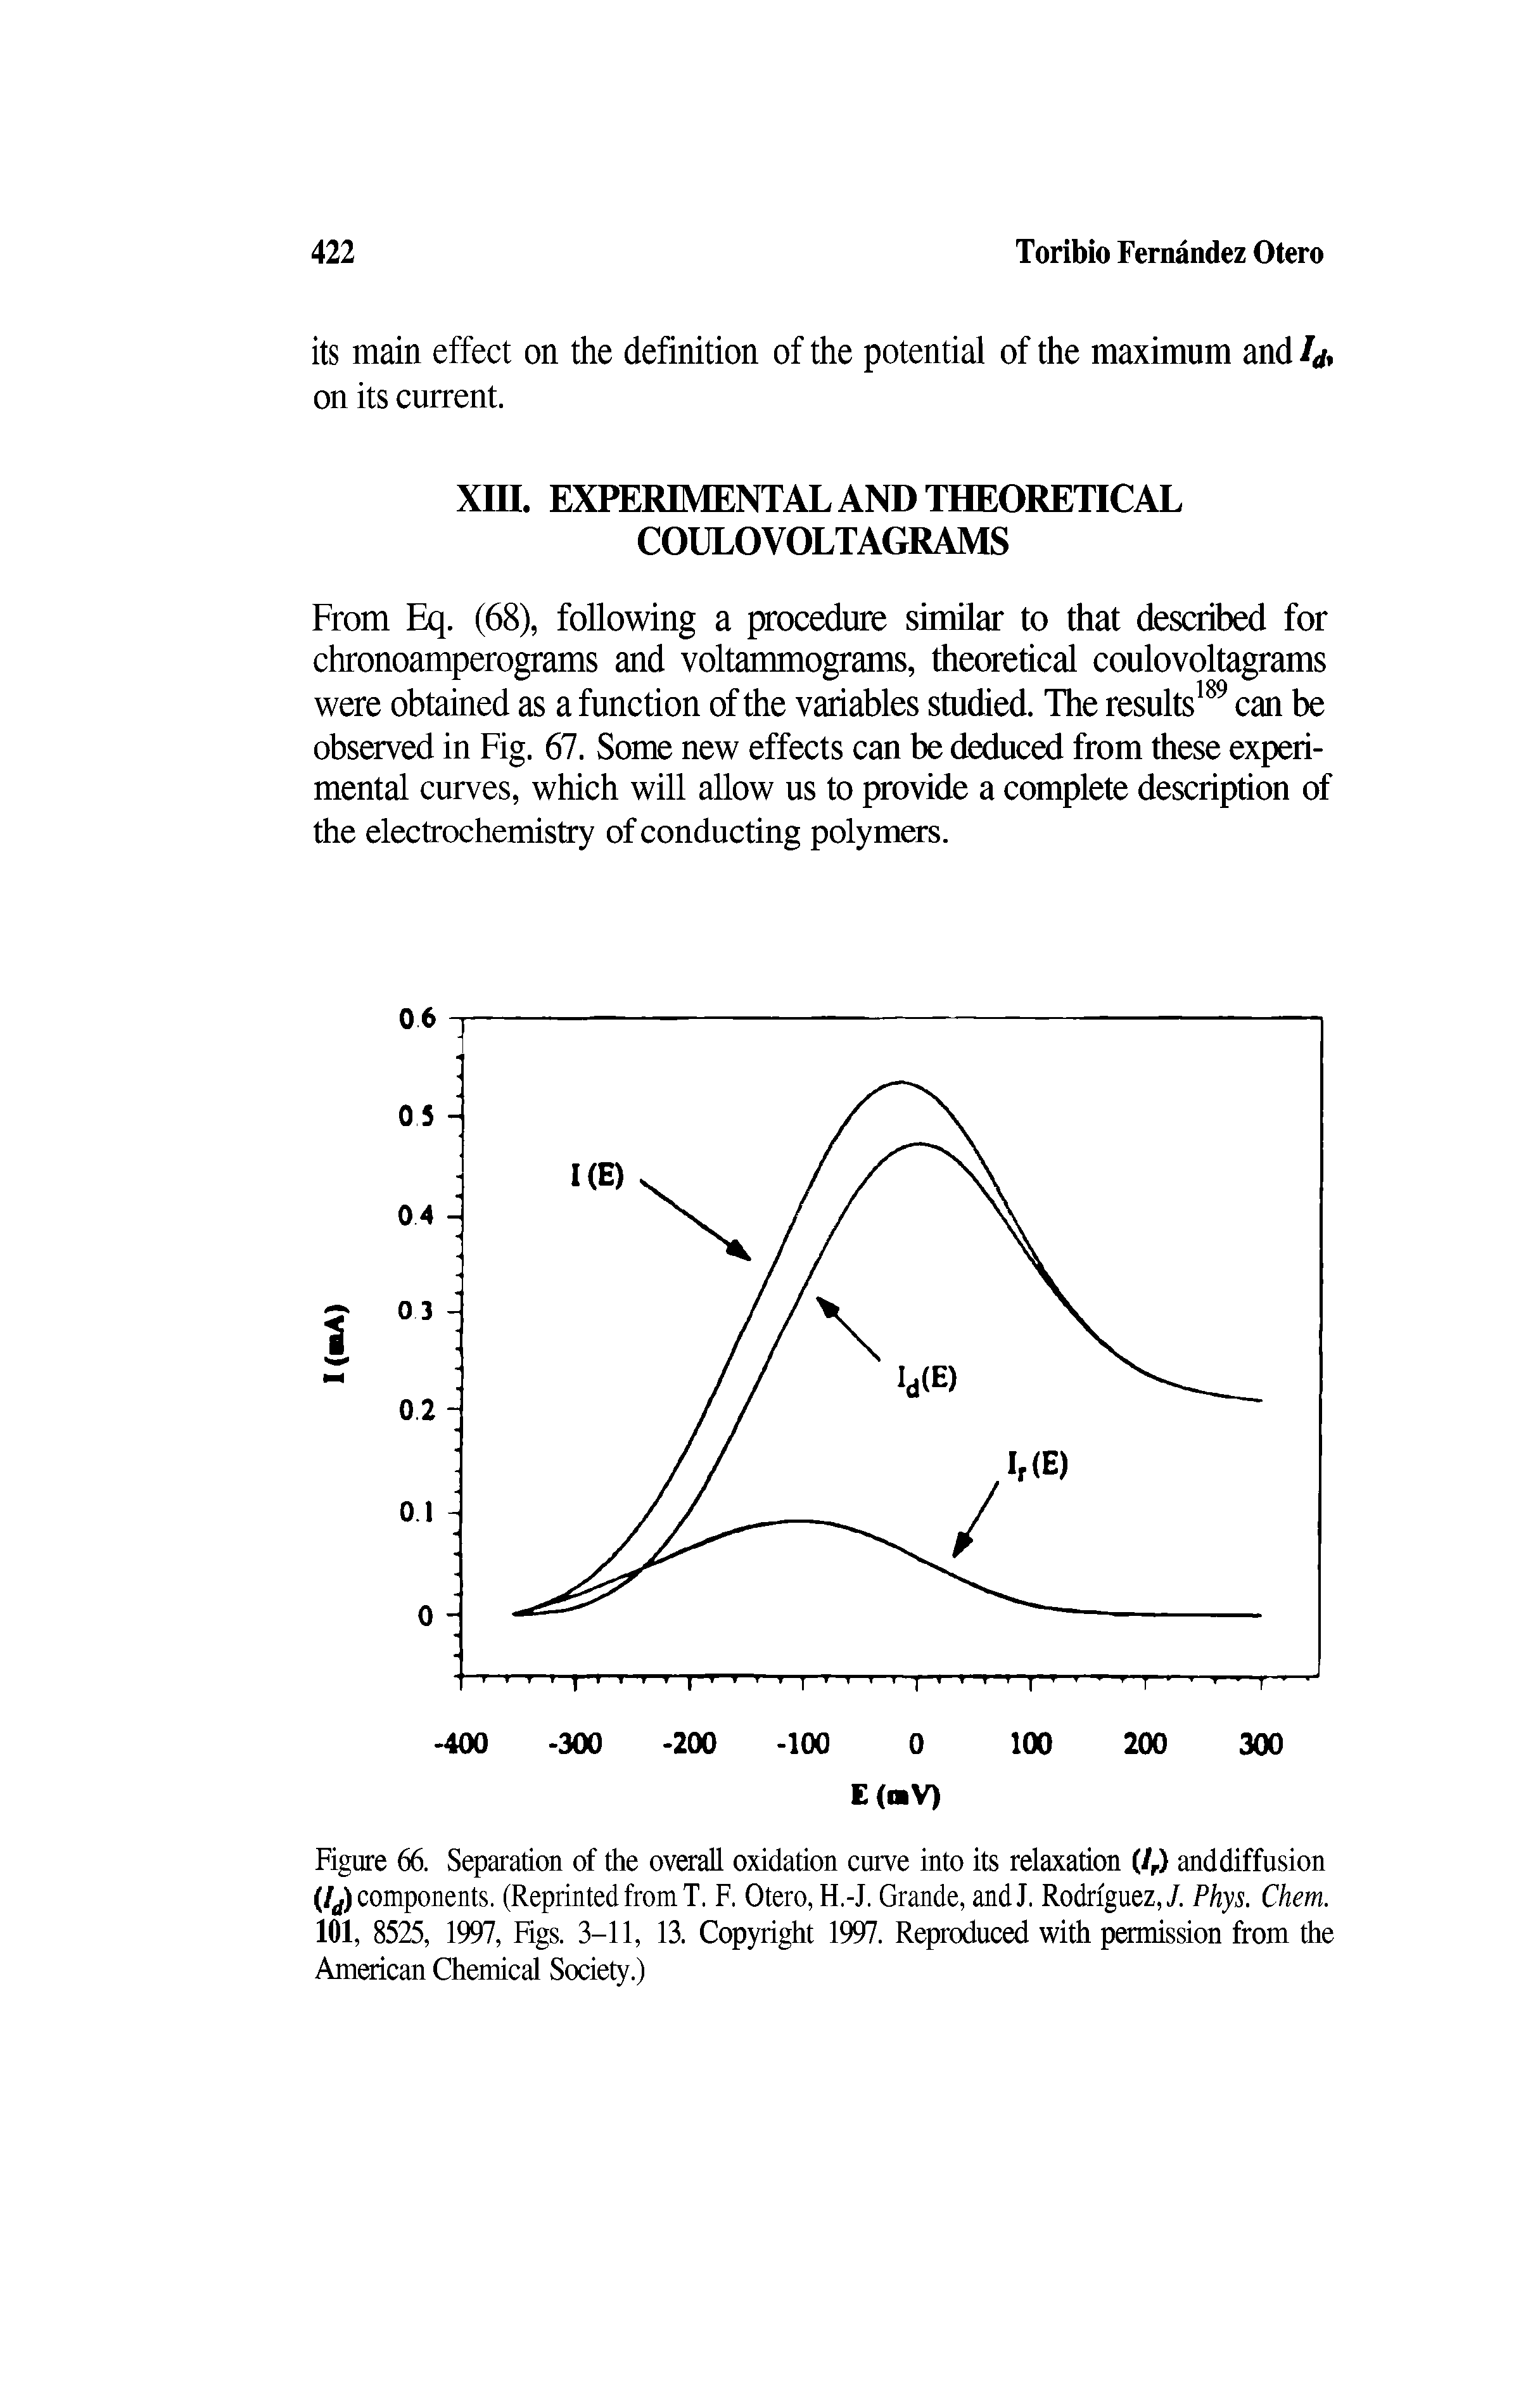 Figure 66. Separation of the overall oxidation curve into its relaxation (/r) and diffusion (/ components. (ReprintedfromT. F. Otero, H.-J. Grande, andJ. Rodriguez,/. Phys. Chem. 101, 8525, 1997, Figs. 3-11, 13. Copyright 1997. Reproduced with permission from the American Chemical Society.)...